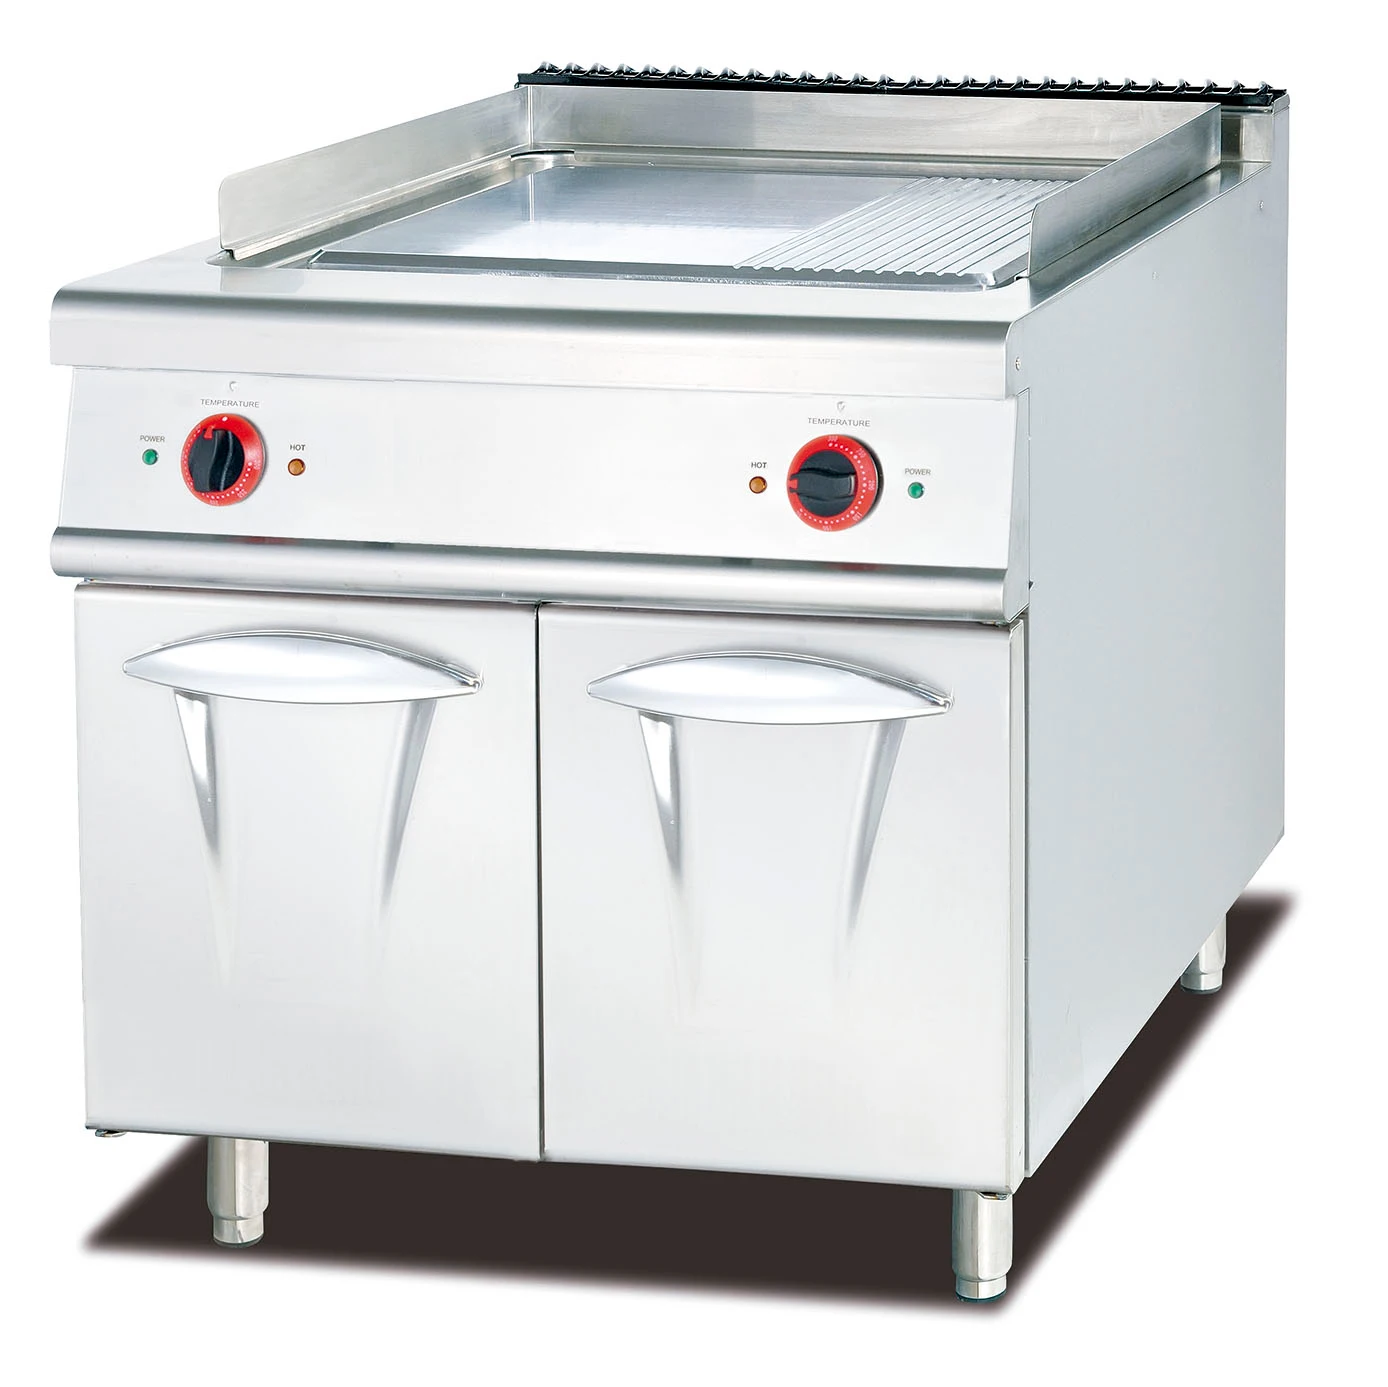 RM Commercial bbq restaurant kitchen stainless steel cooking gas electric burger griddle & stand grill pan flat plate heavy duty